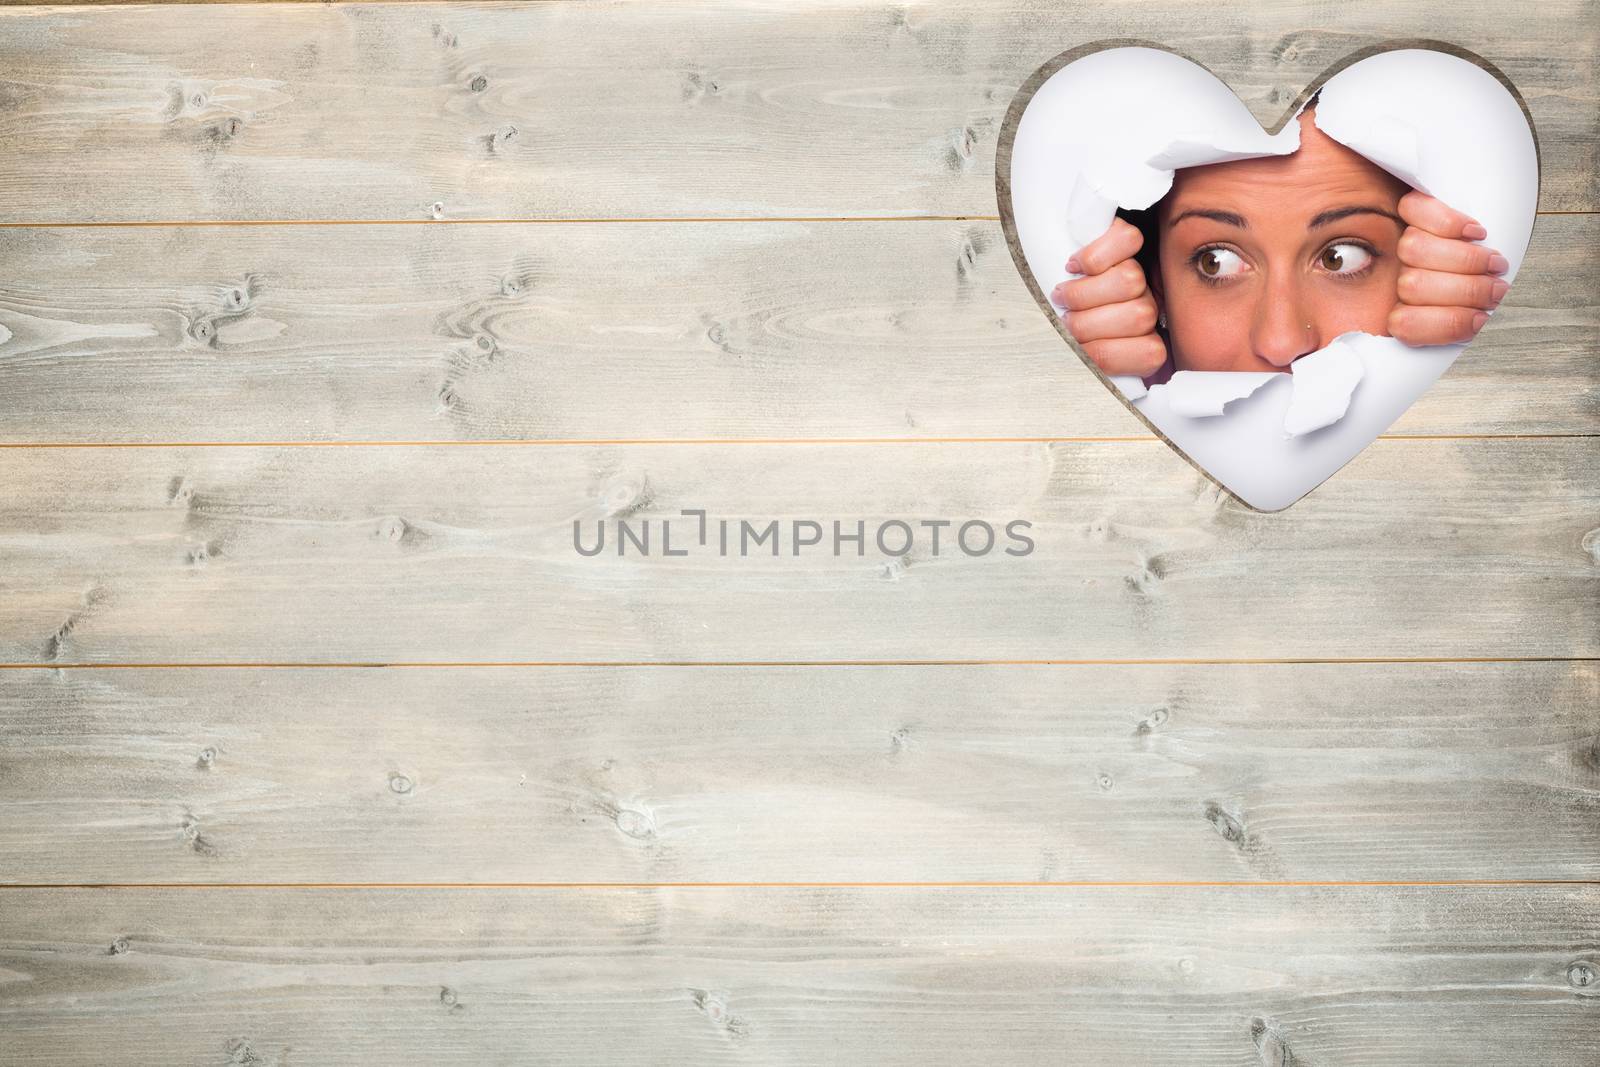 Young woman looking through paper rip against heart in wood